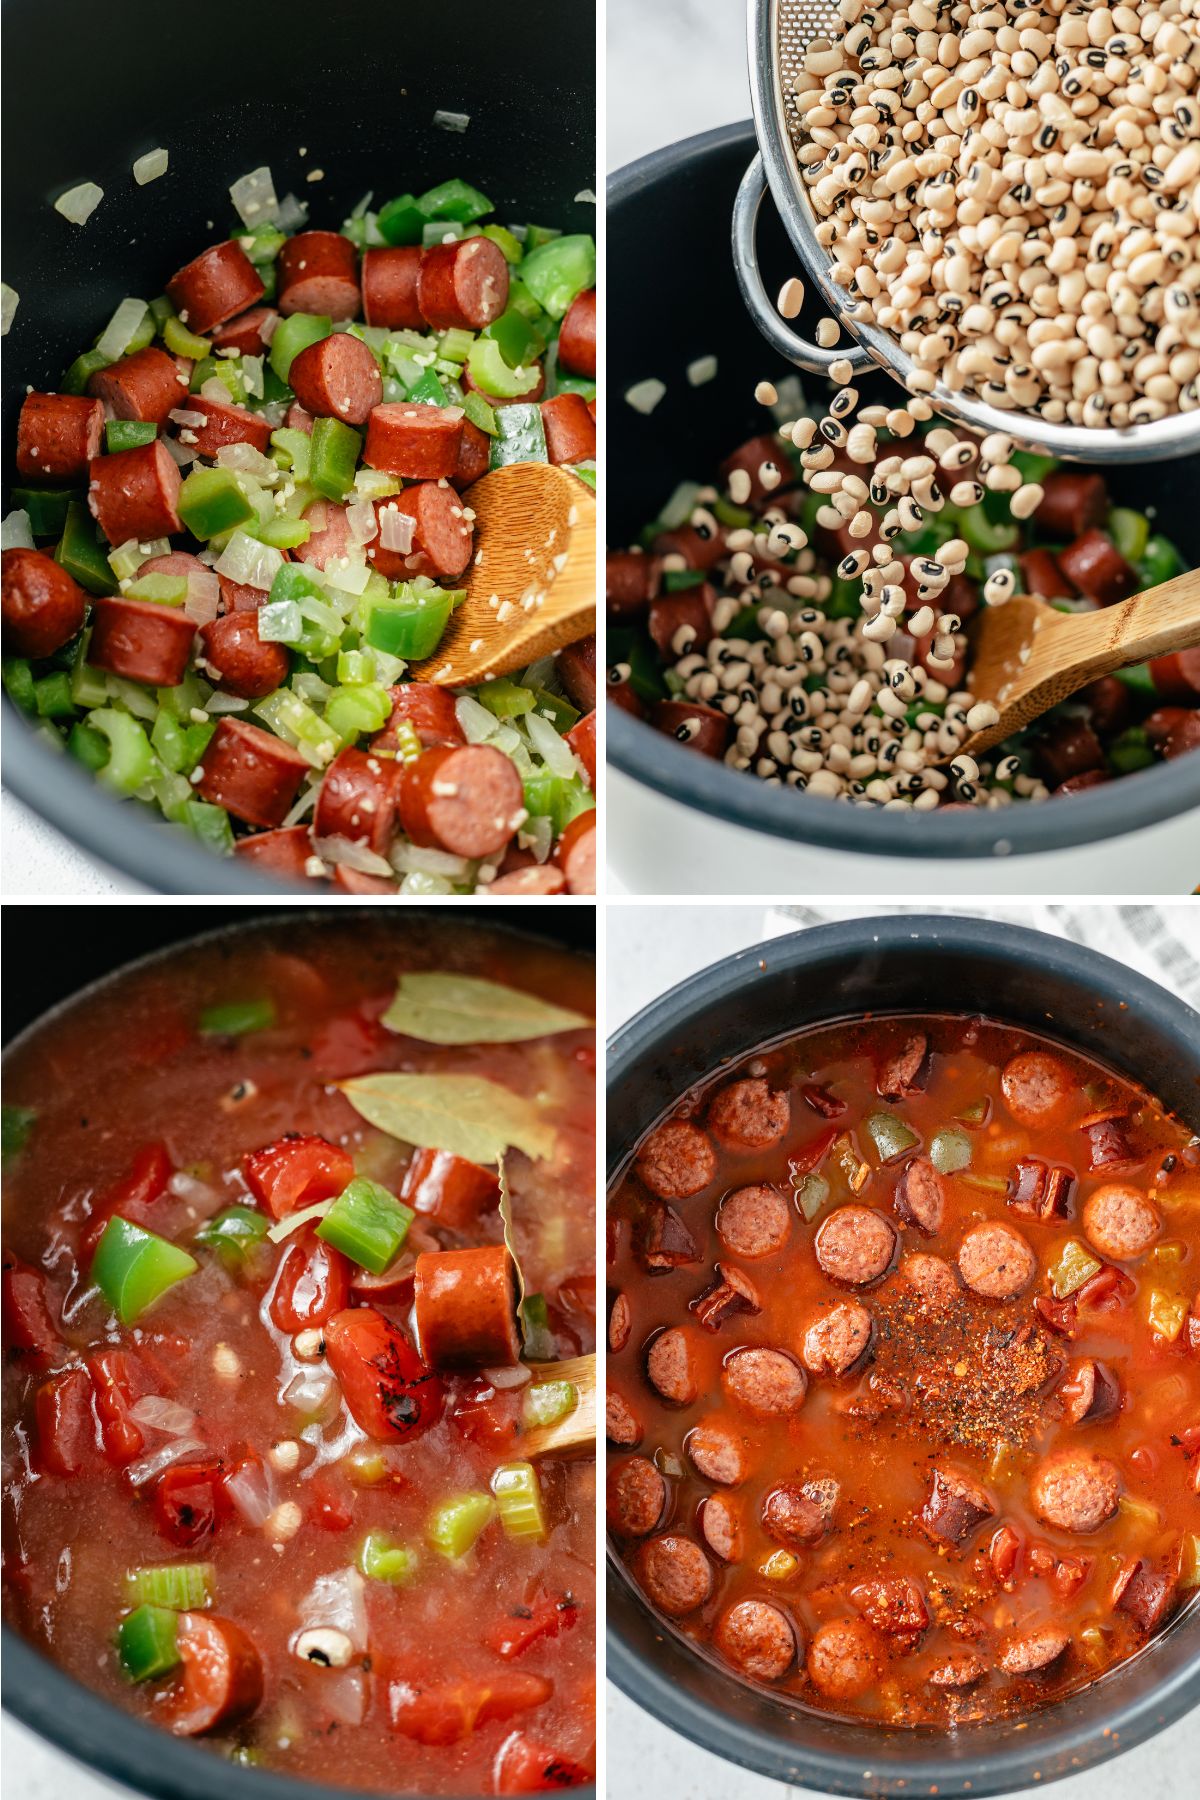 Step-by-step guide to creating delicious Black Eyed Pea Soup in an instant pot: 1. Sautéing savory ingredients in olive oil, 2. Simmering a medley of smoked sausage, vegetables, and garlic, 3. Adding fire-roasted tomatoes and dried black-eyed peas, 4. Seasoning with homemade Cajun spices and simmering to perfection